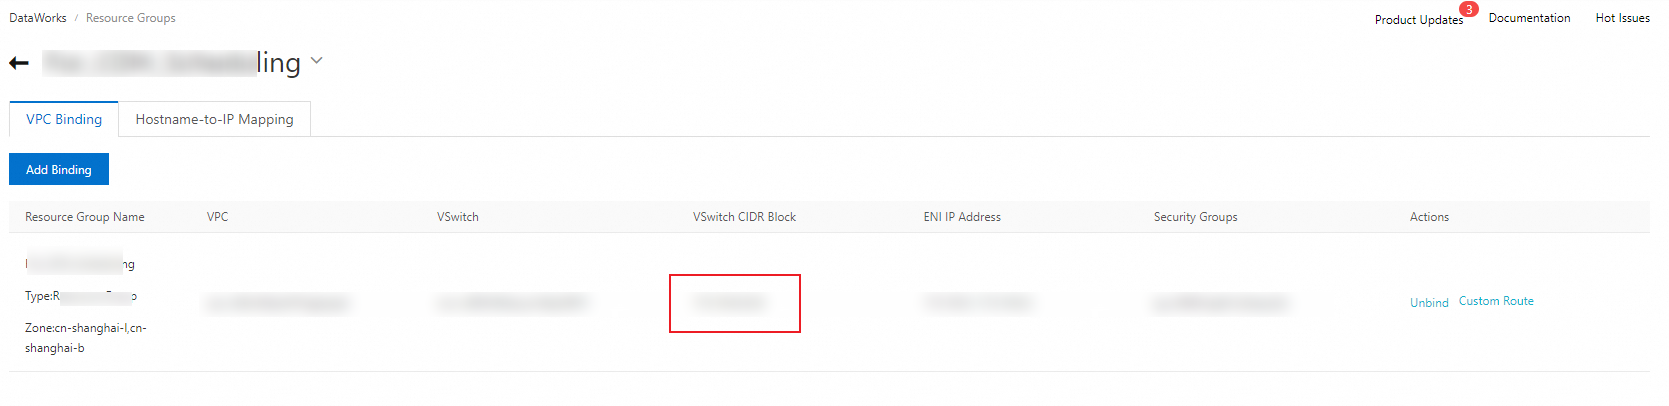 CIDR block of the vSwitch with which the exclusive resource group for Data Integration is associated